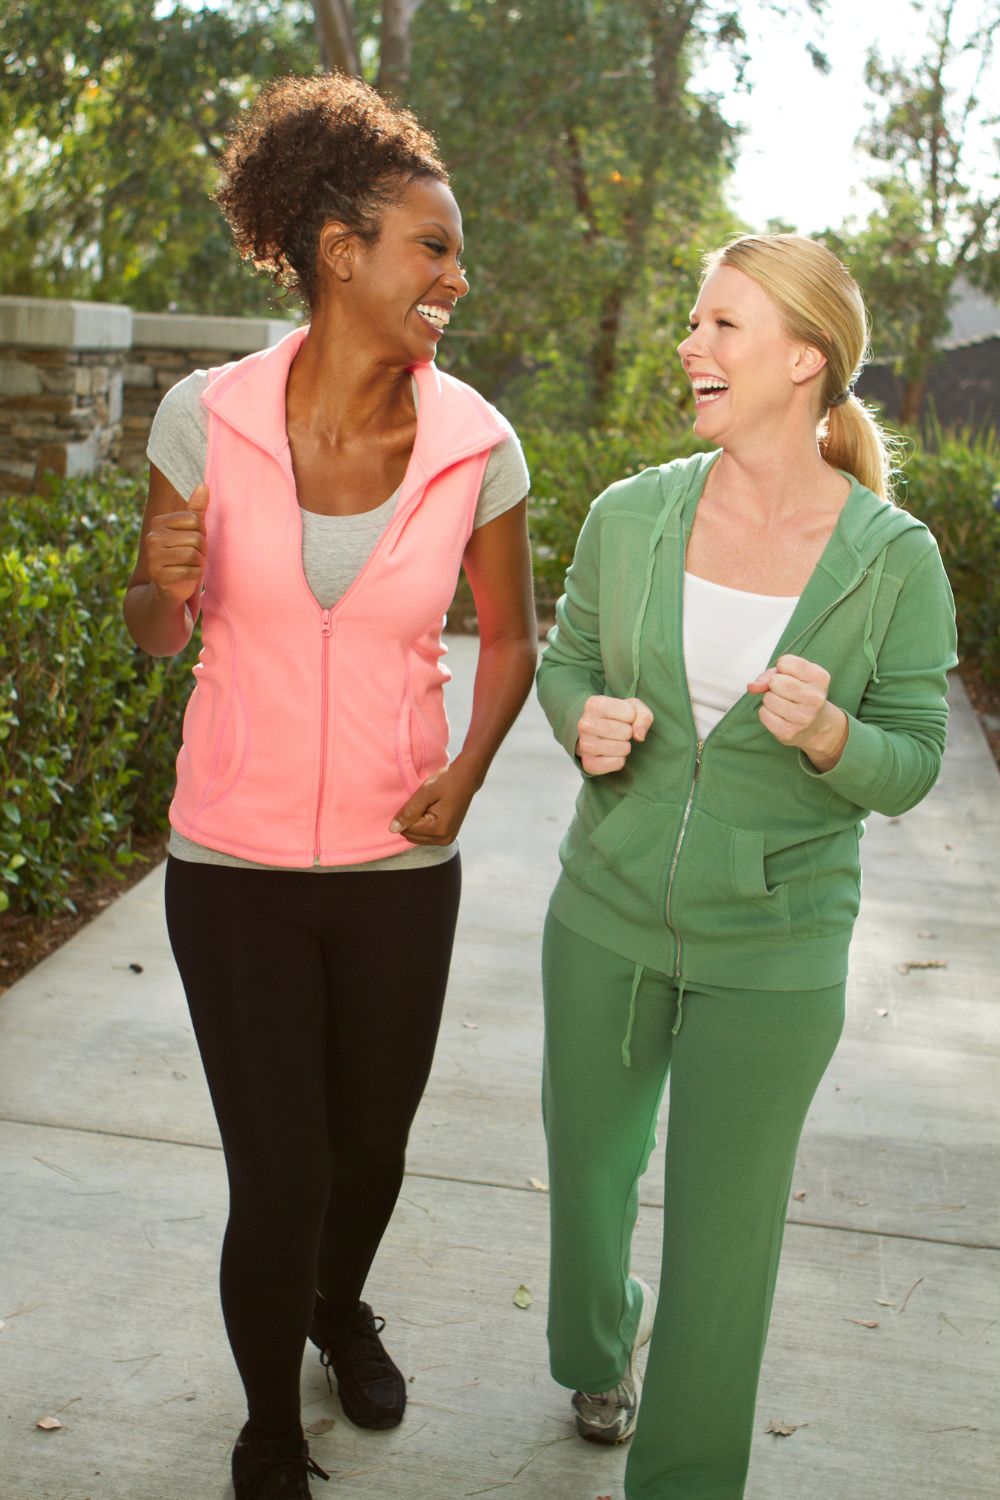 two ladies walking for exercise